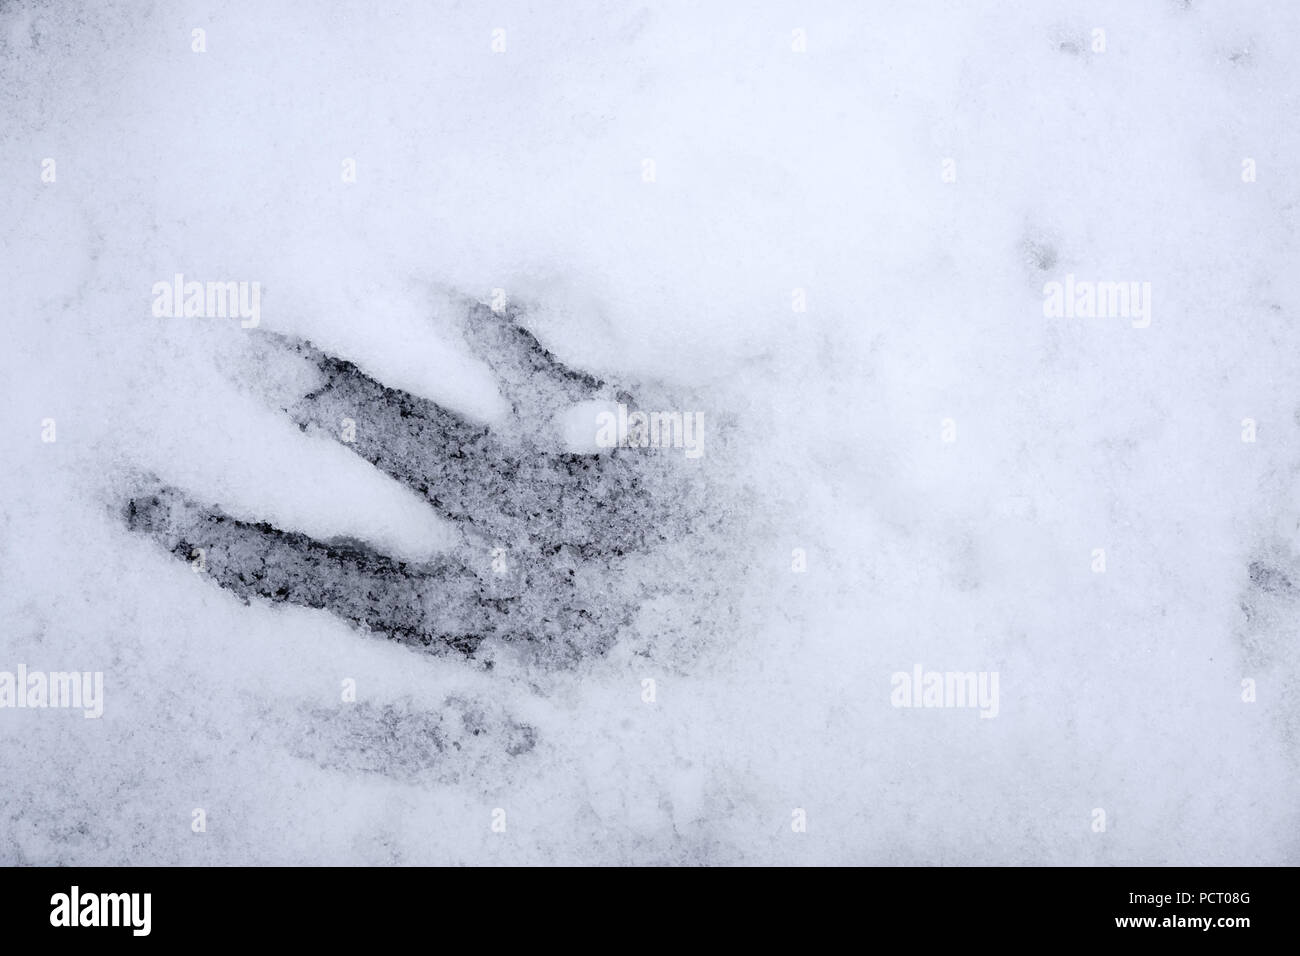 Top view and close-up on a handprint in a dusting of snow Stock Photo